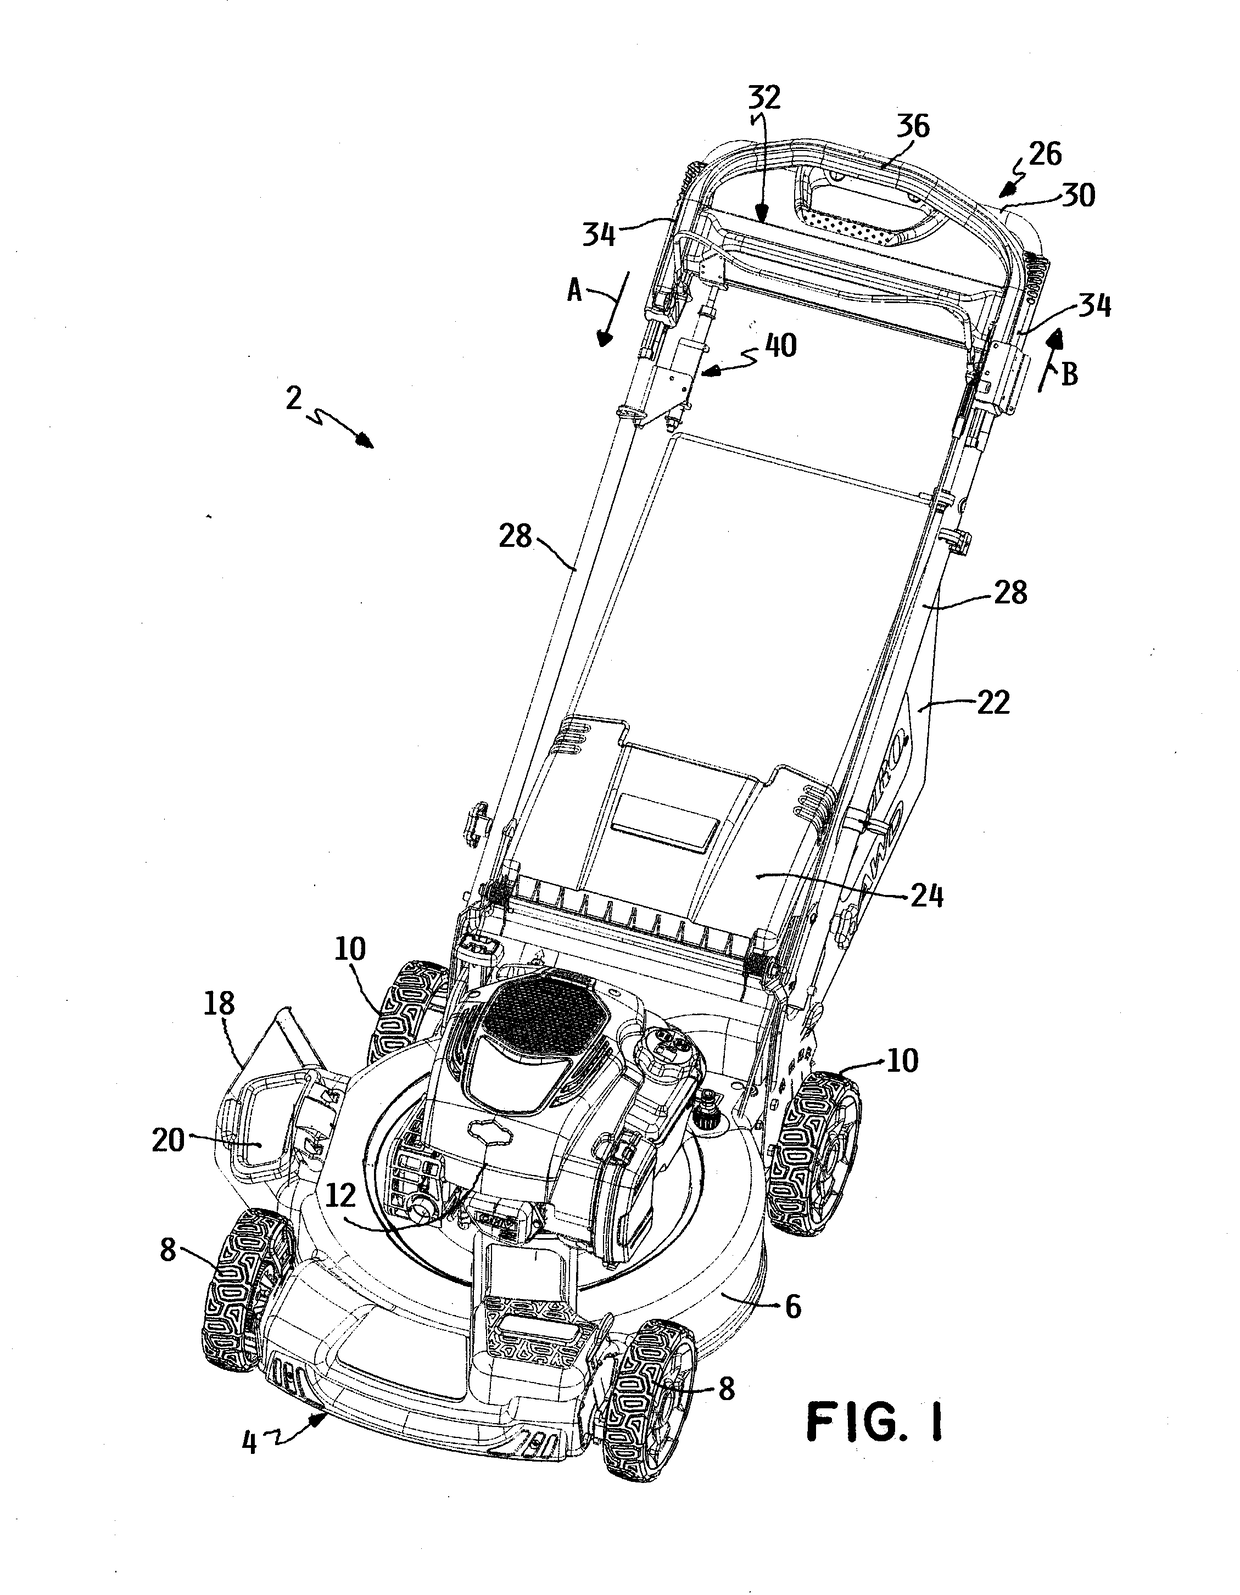 Walk power mower having forward and reverse traction drive